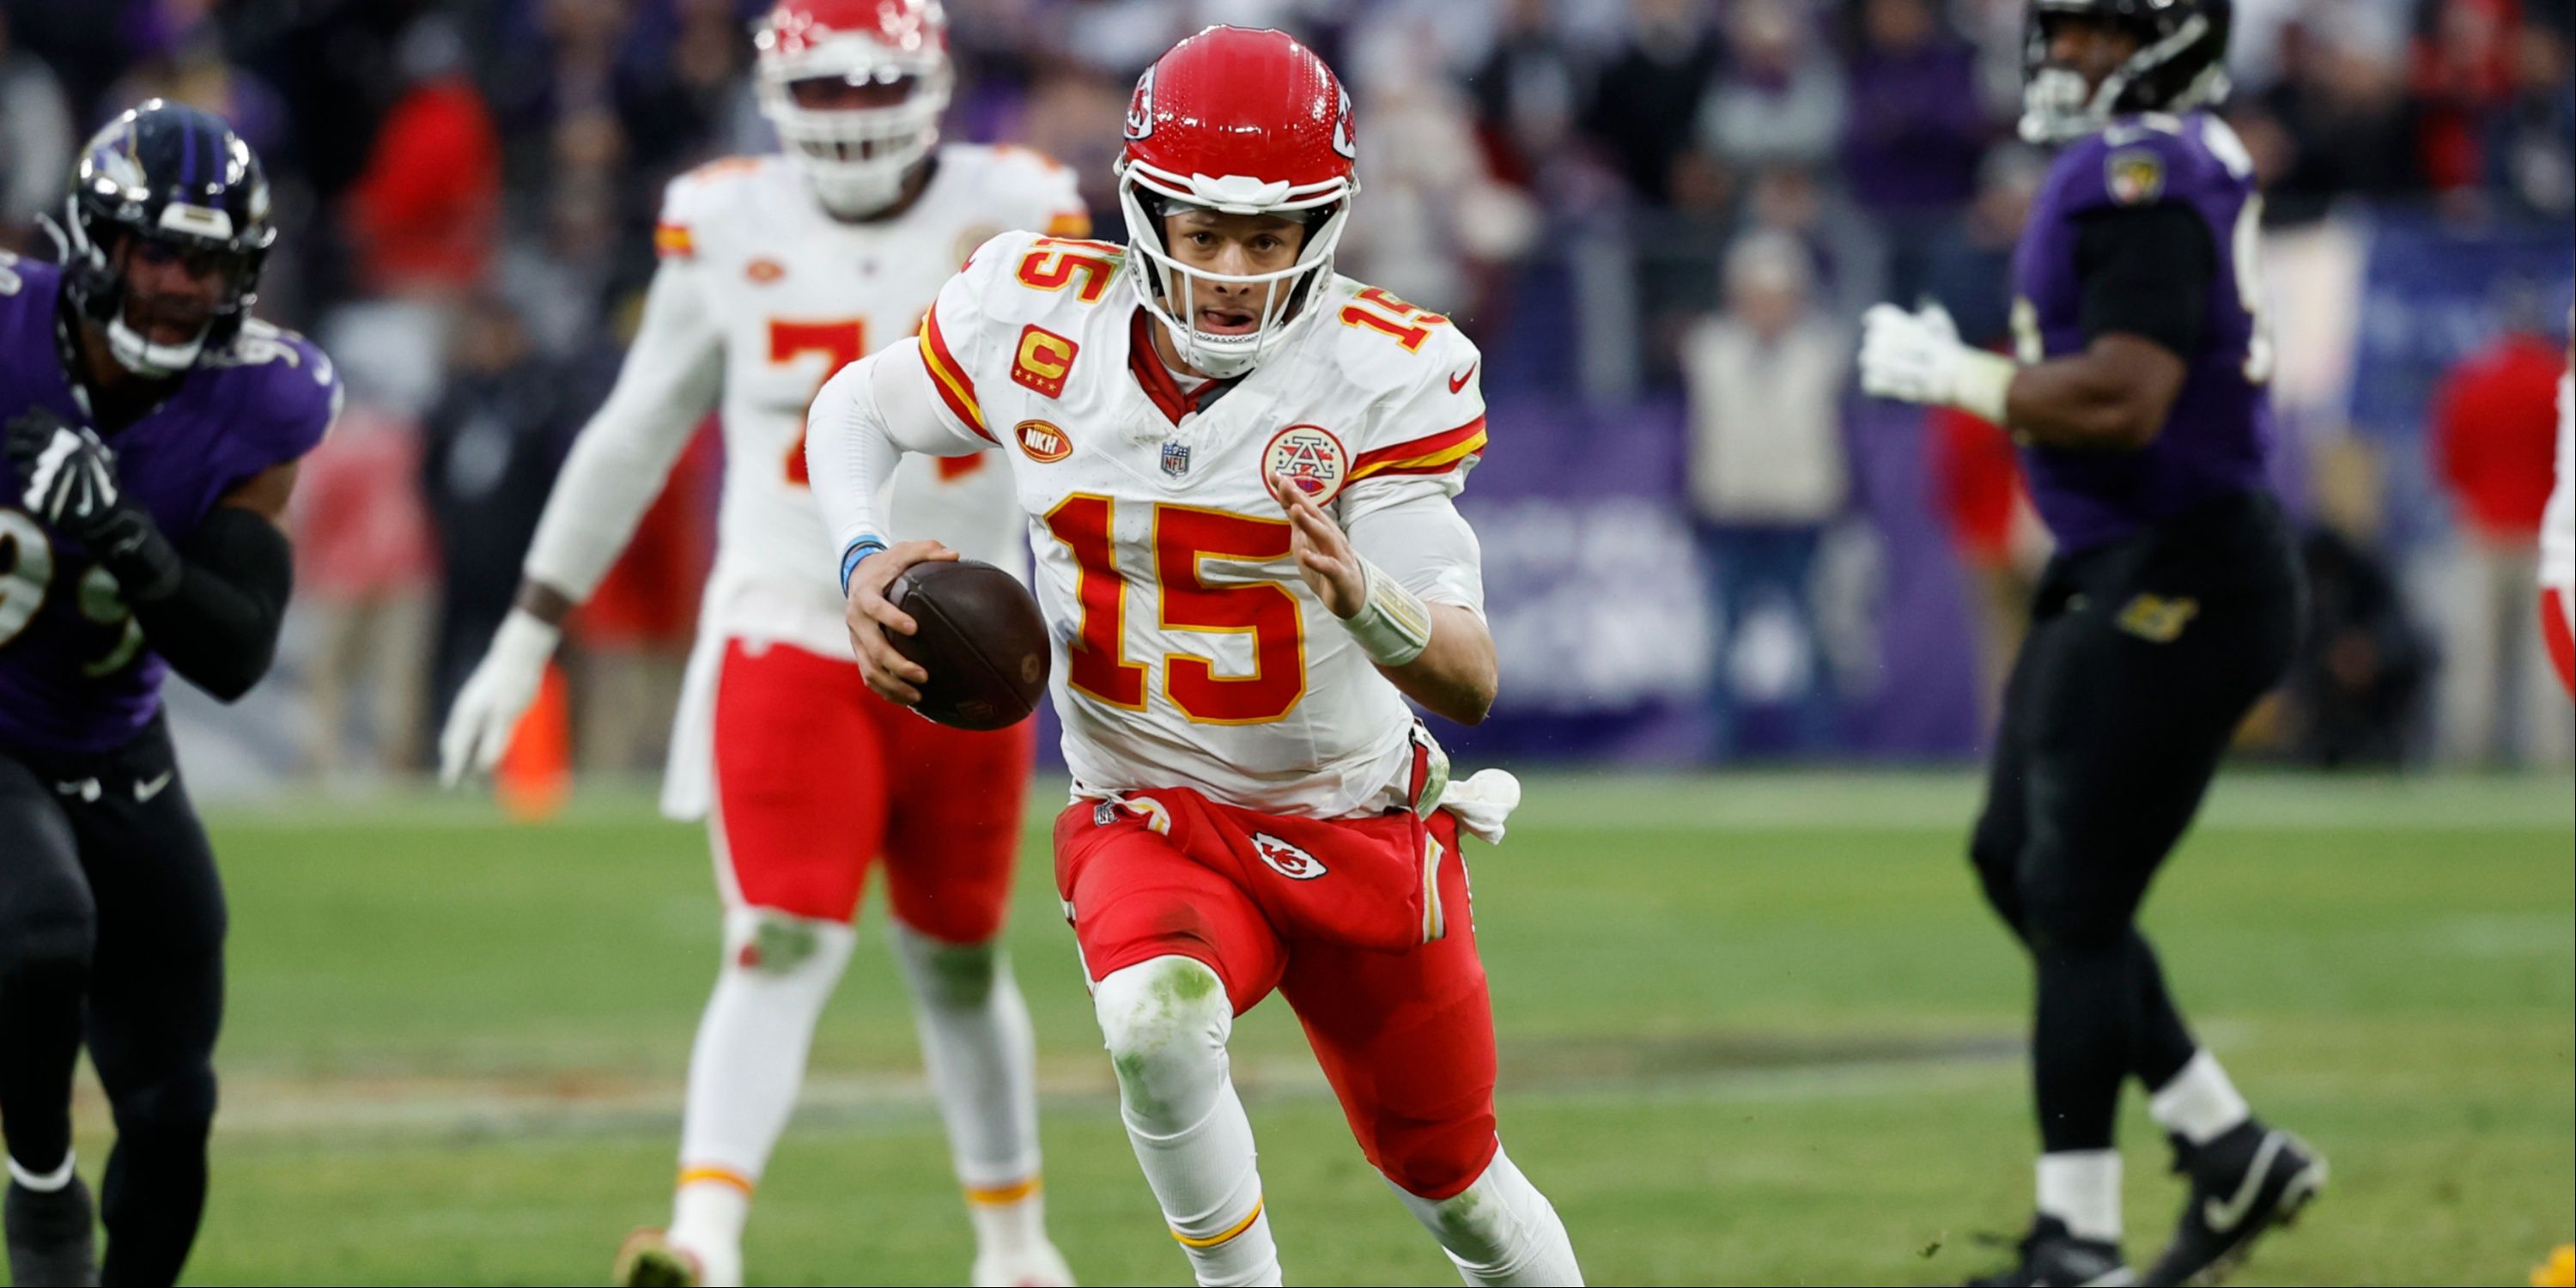 Patrick Mahomes rushes against the Baltimore Ravens in the AFC Championship game